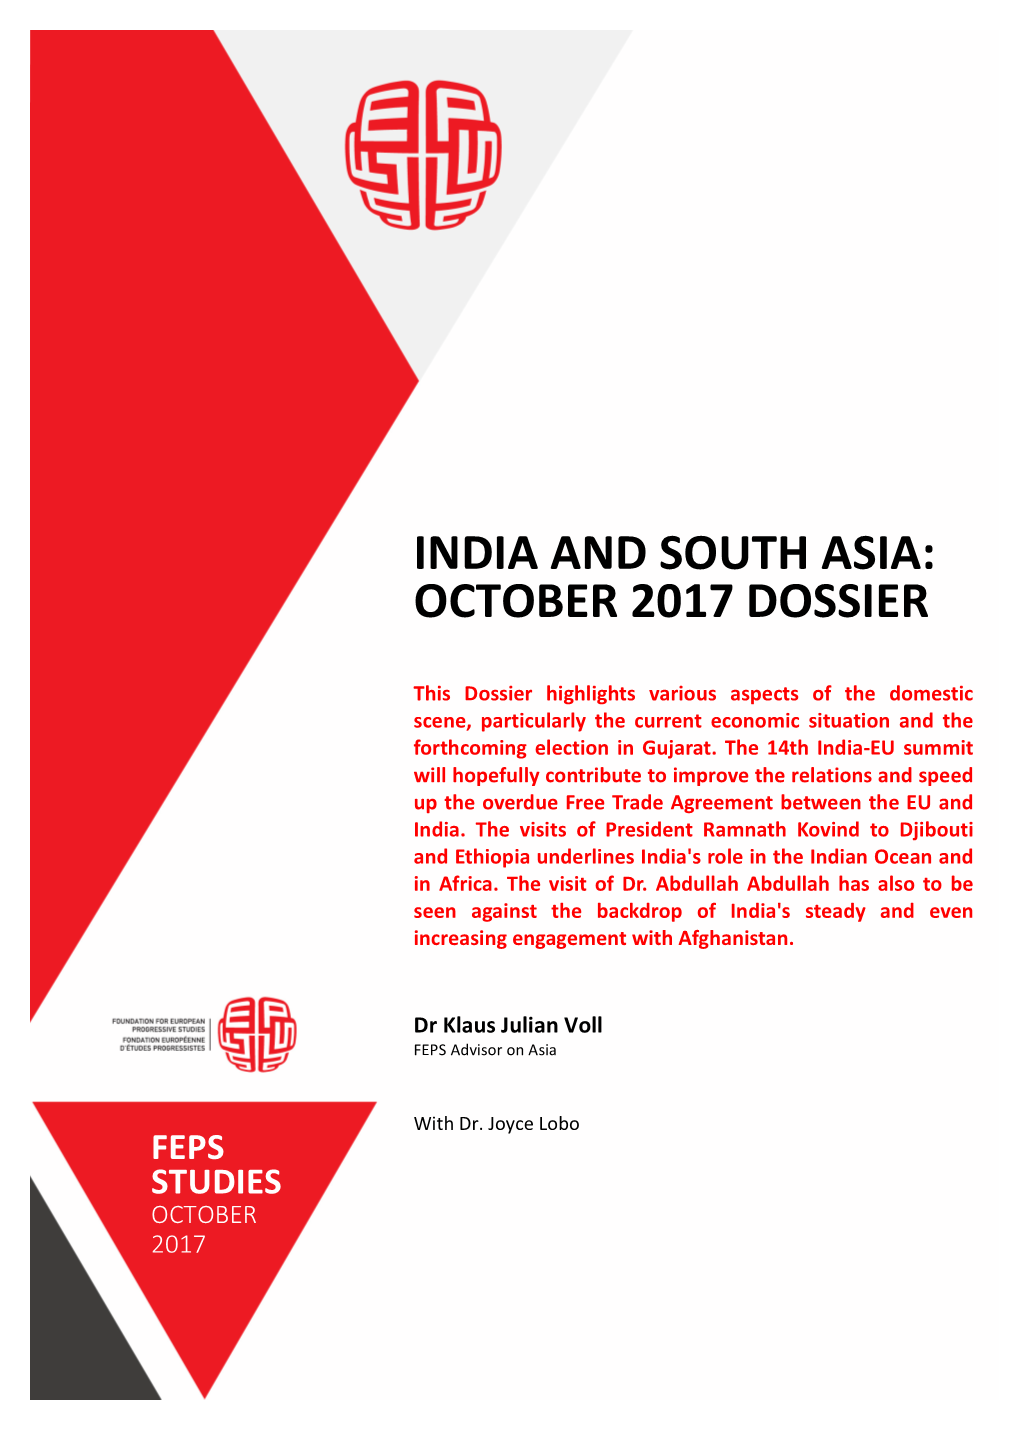 India and South Asia: October 2017 Dossier